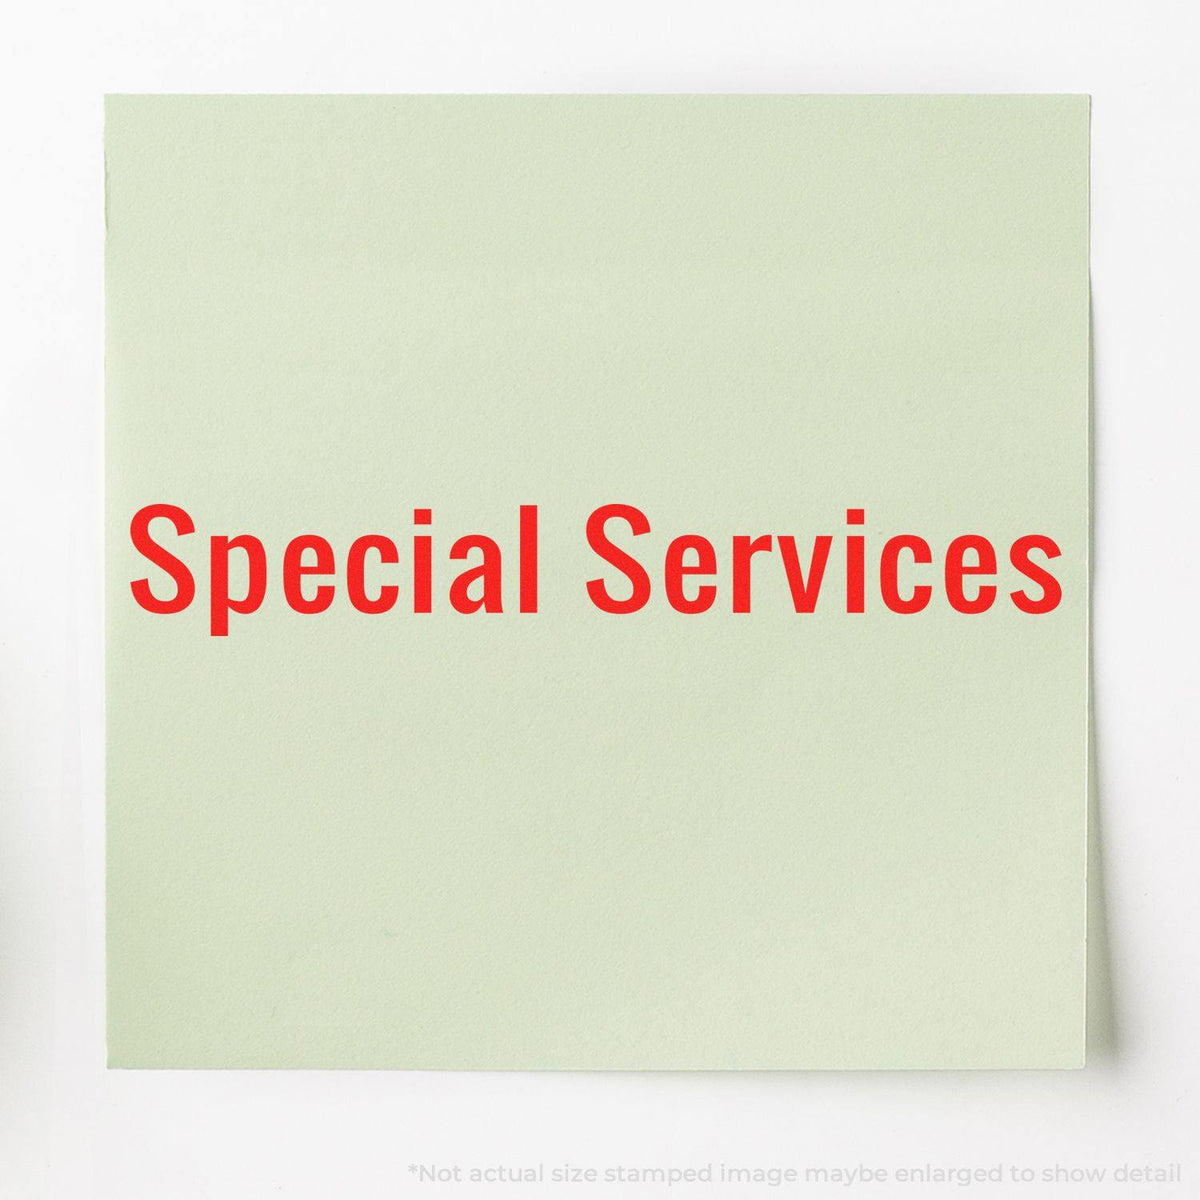 Special Services Rubber Stamp In Use Photo